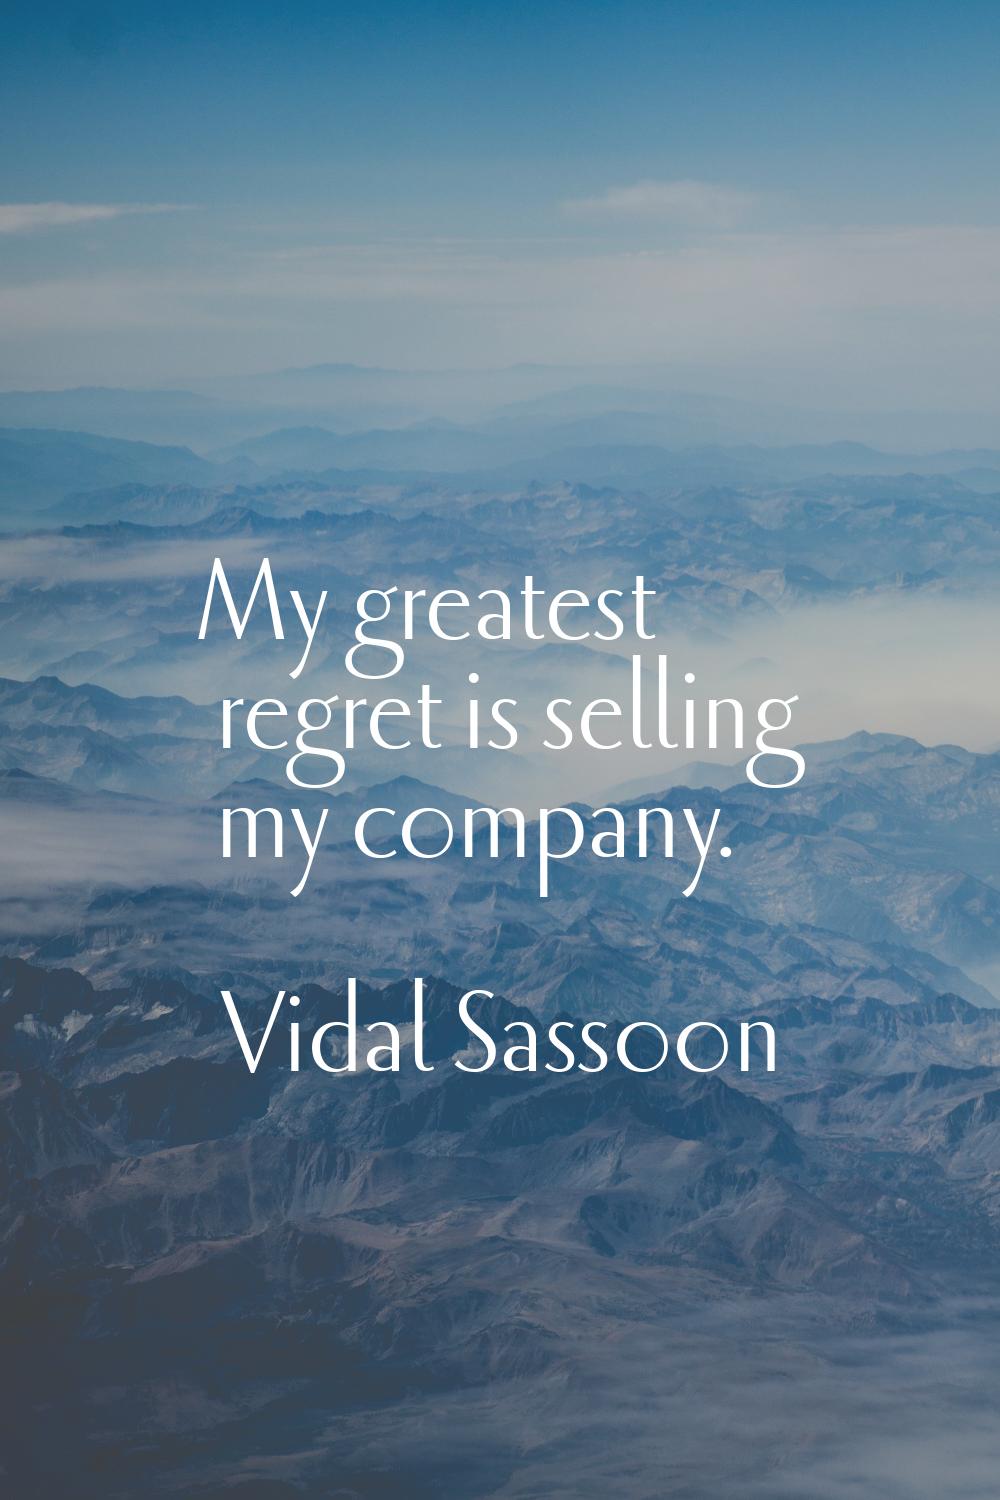 My greatest regret is selling my company.